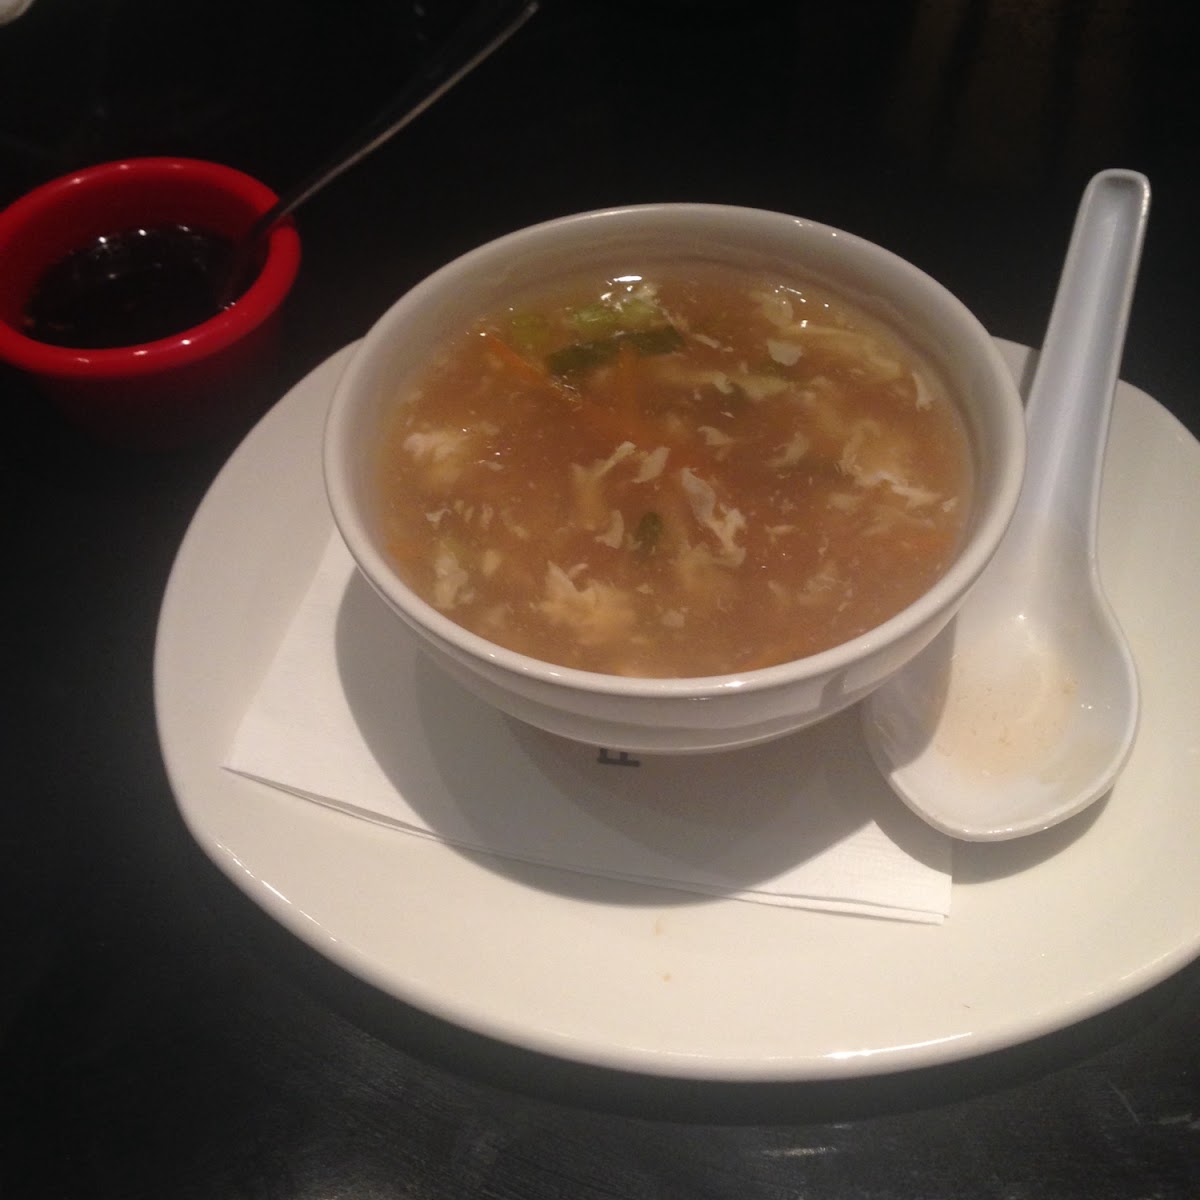 Egg Drop soup is gluten free and they gave me a cup of gluten free soy sauce.